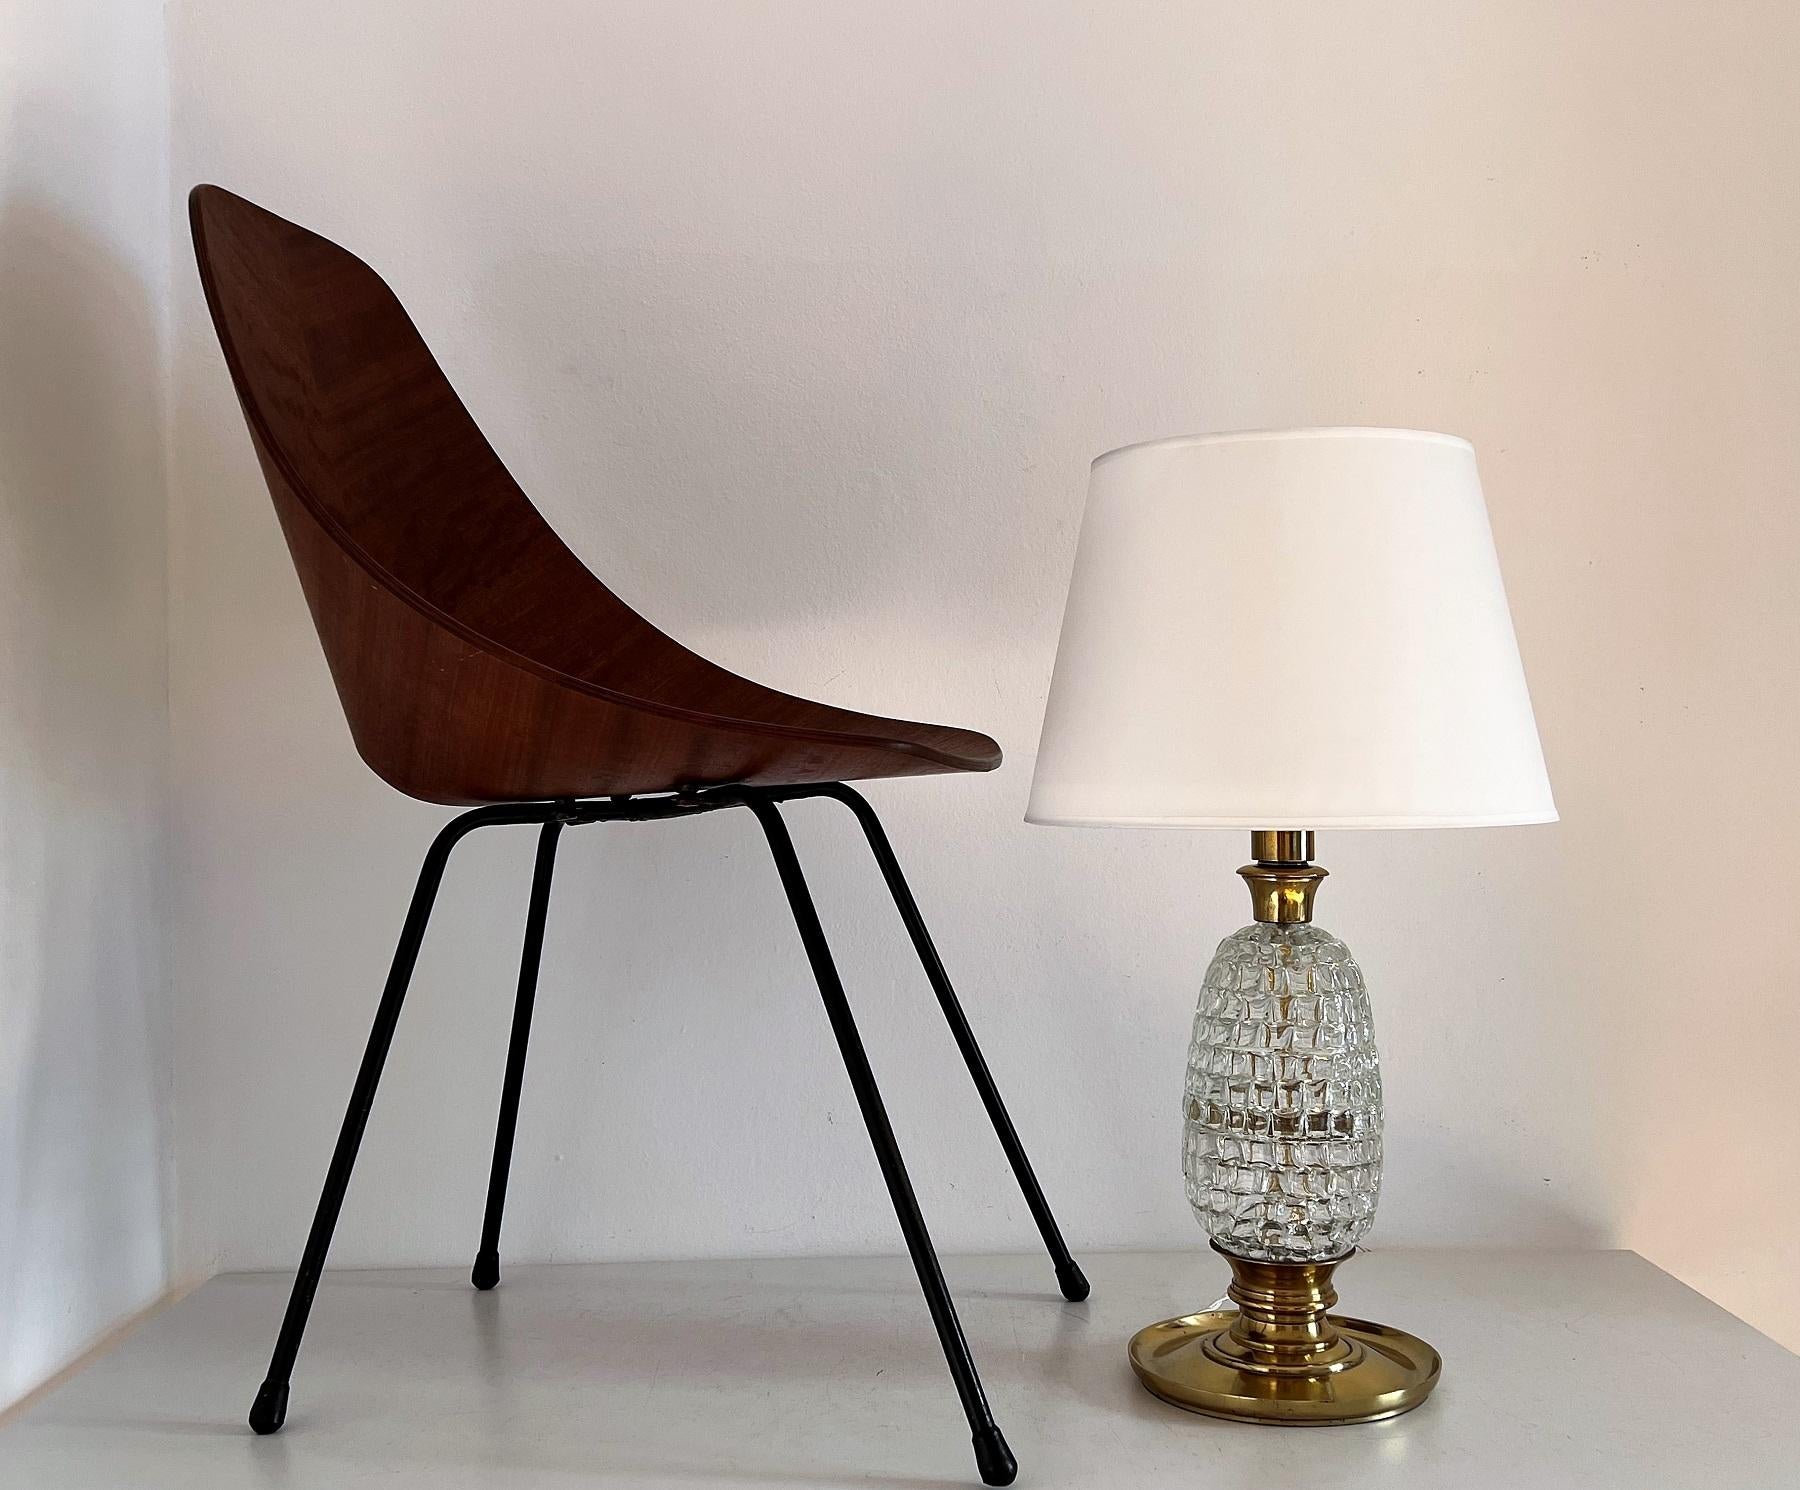 Italian Mid-Century Table Lamp with Brass and Creased Murano Glass Body, 1960s For Sale 8